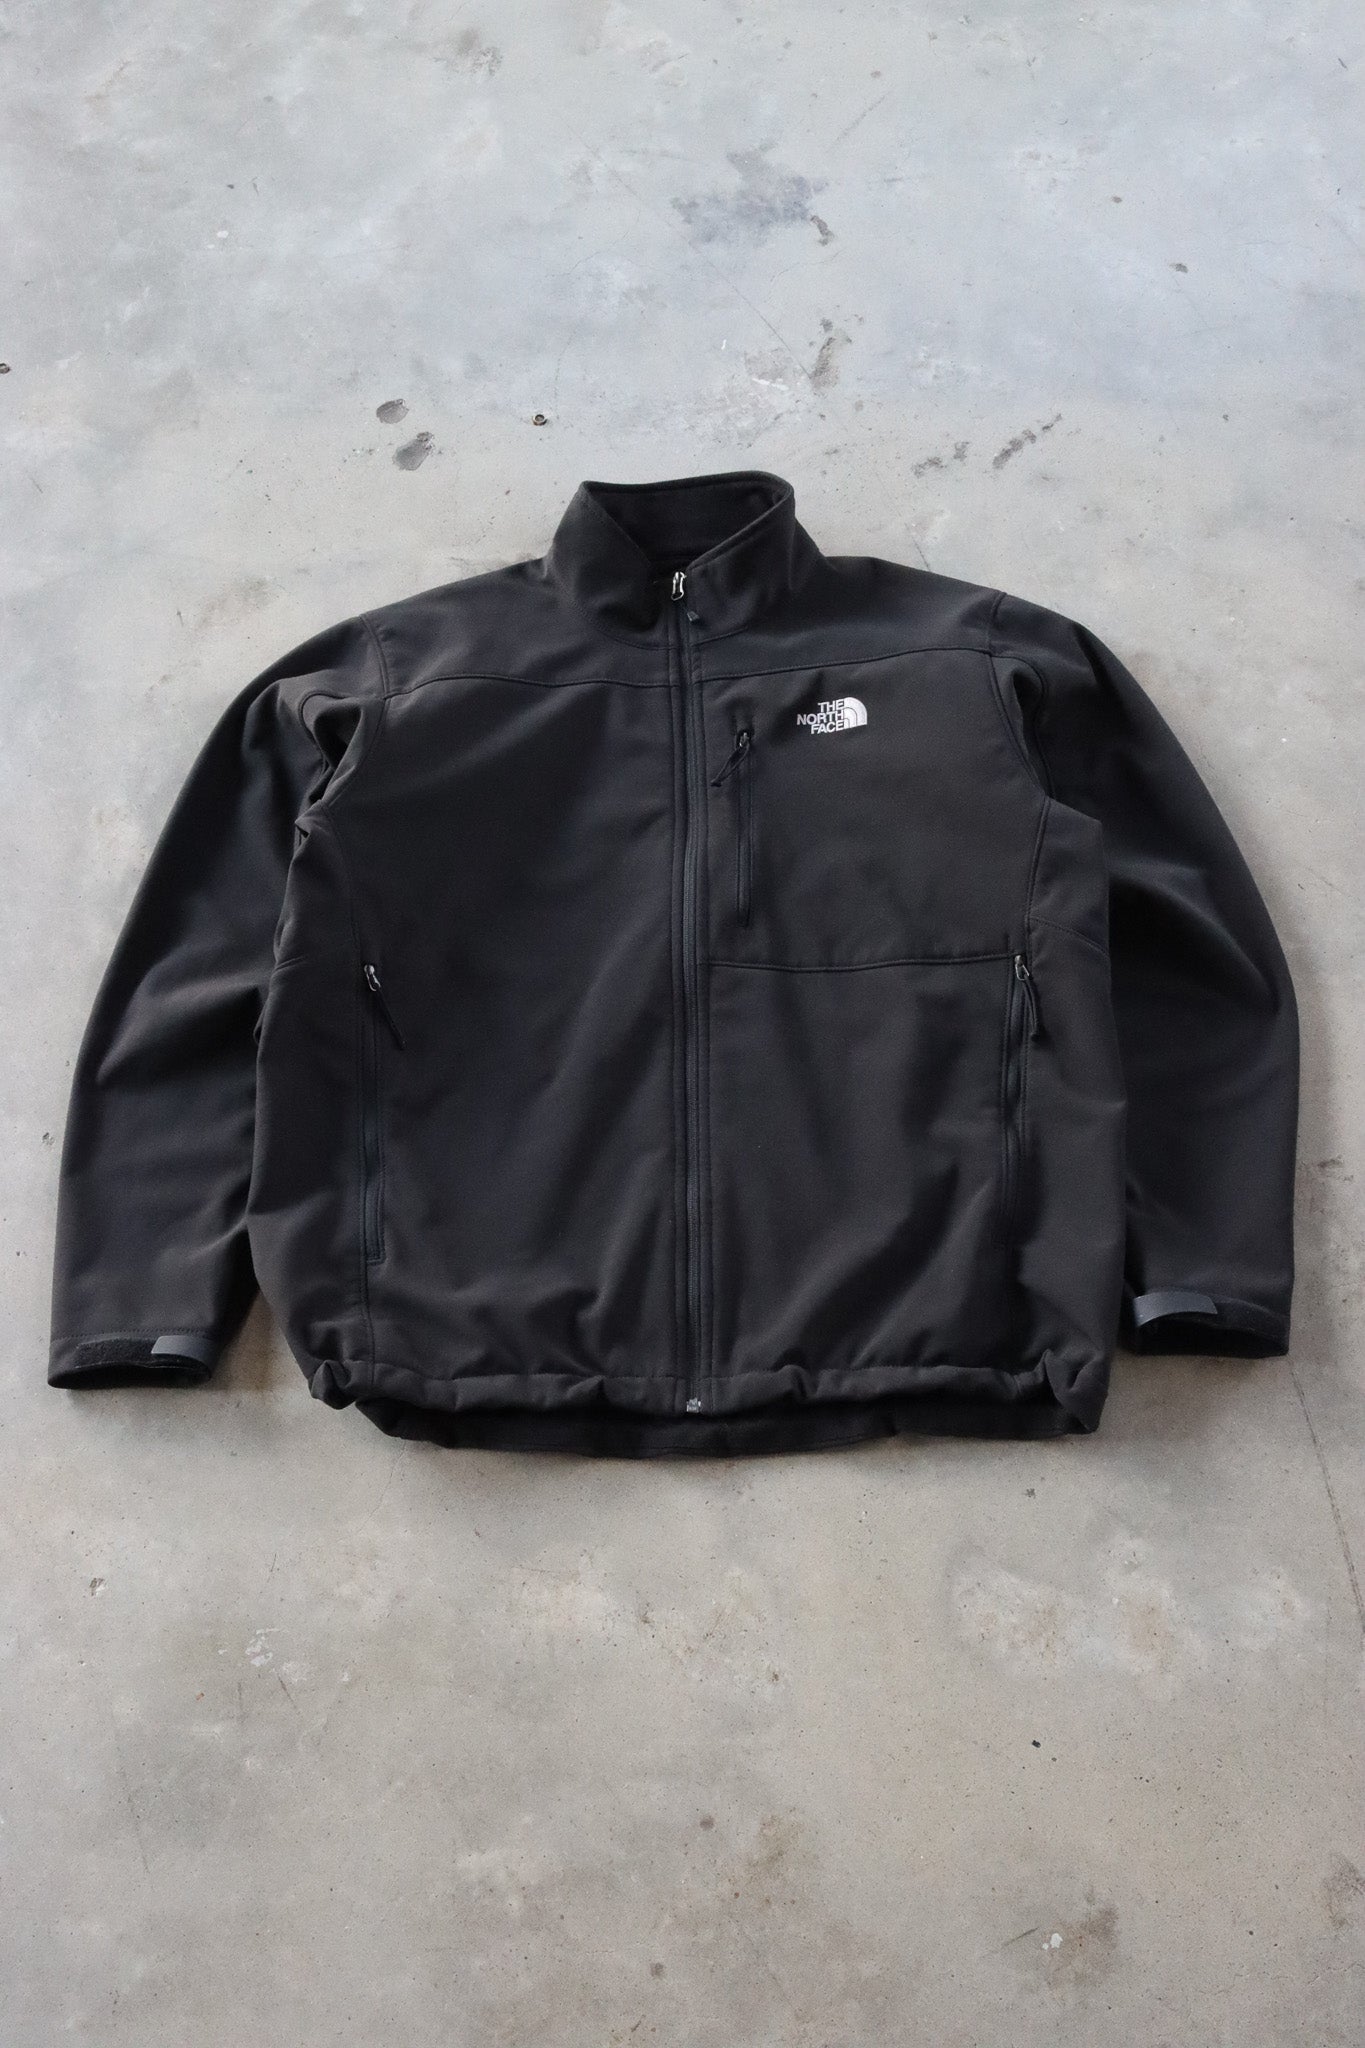 Vintage The North Face Jacket XL